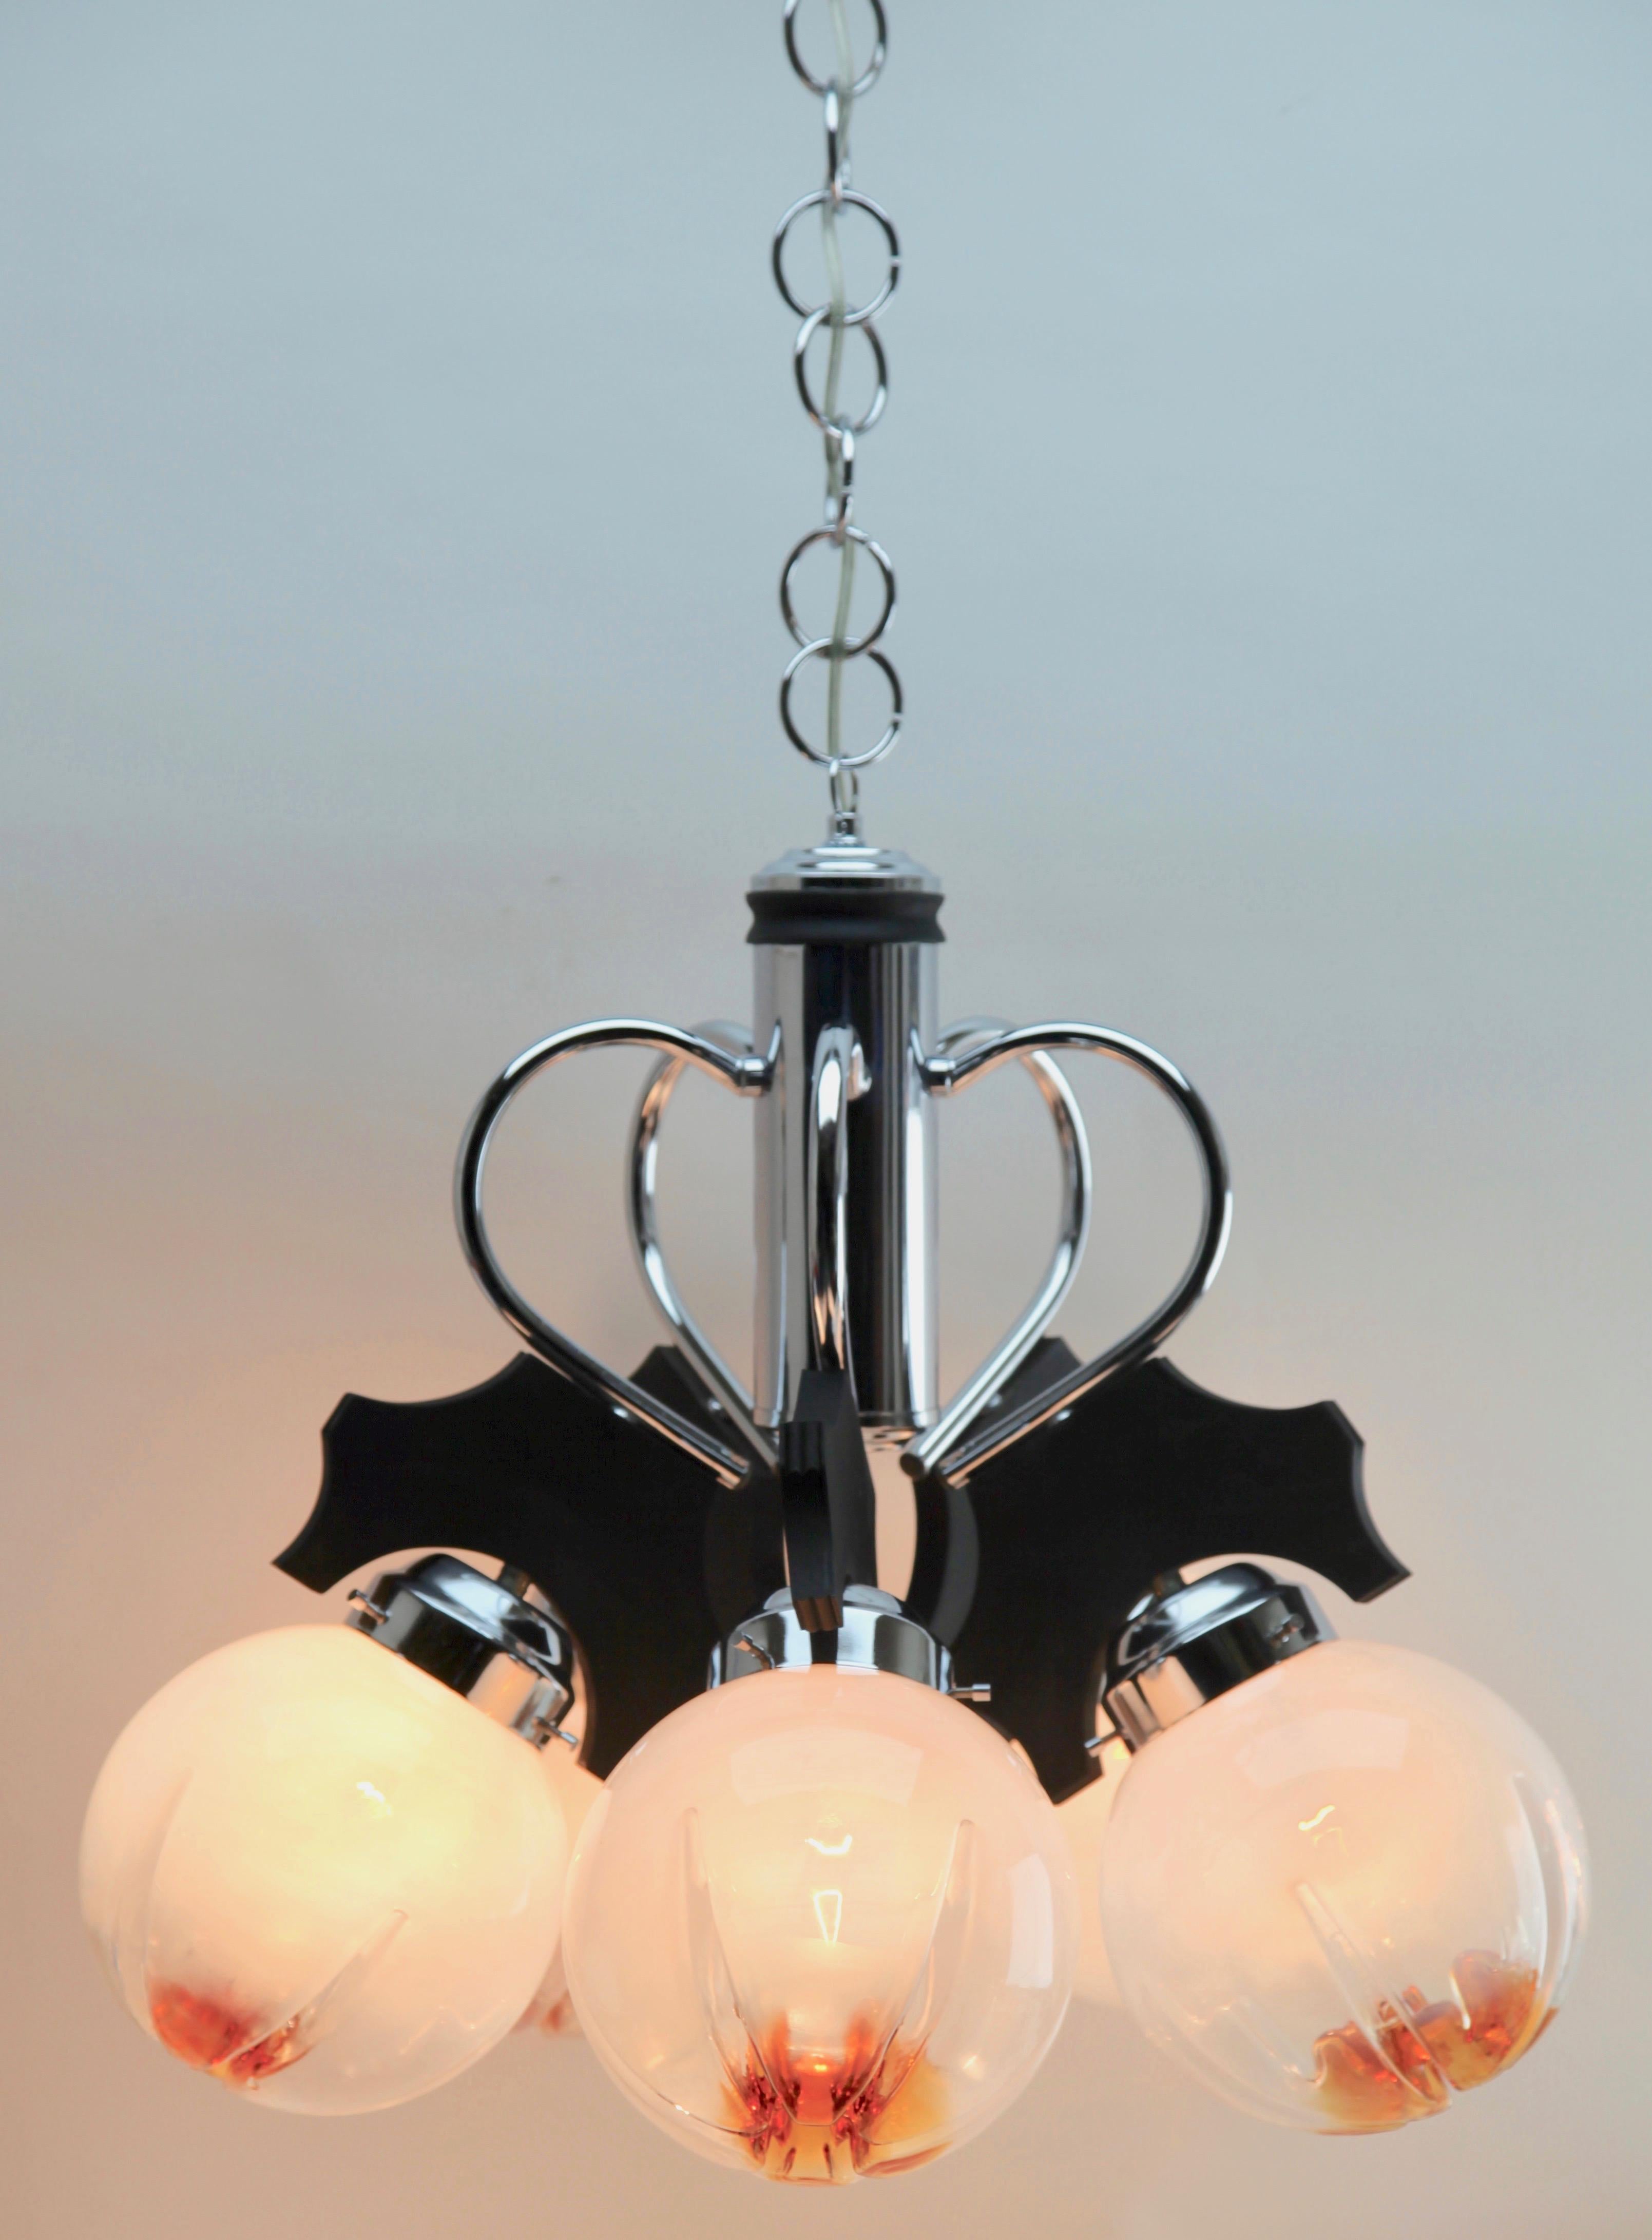 Pendant by Mazzega with 5 Globes of Clear Glass with Orange Inclusions For Sale 5